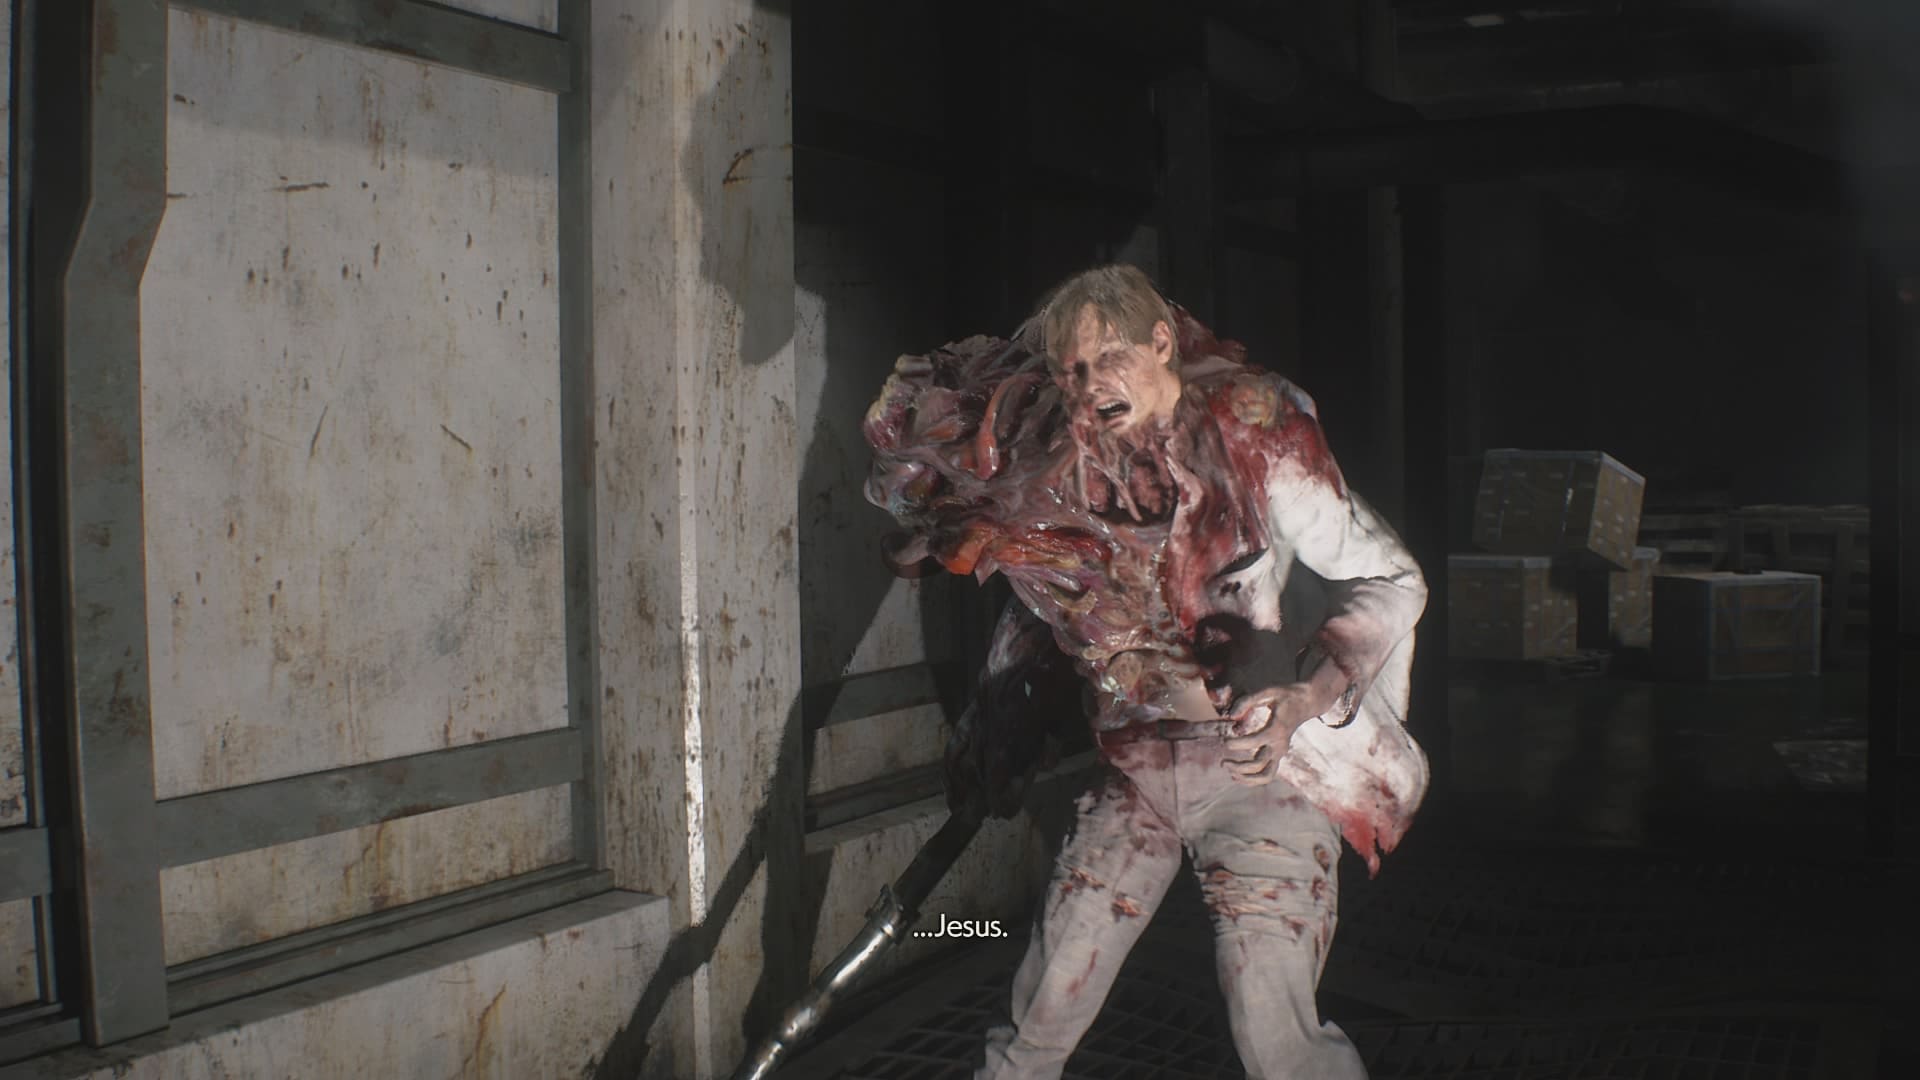 Resident Evil 2' Review: A Deliciously Fresh Zombie Bite Into Classic  Survival Horror